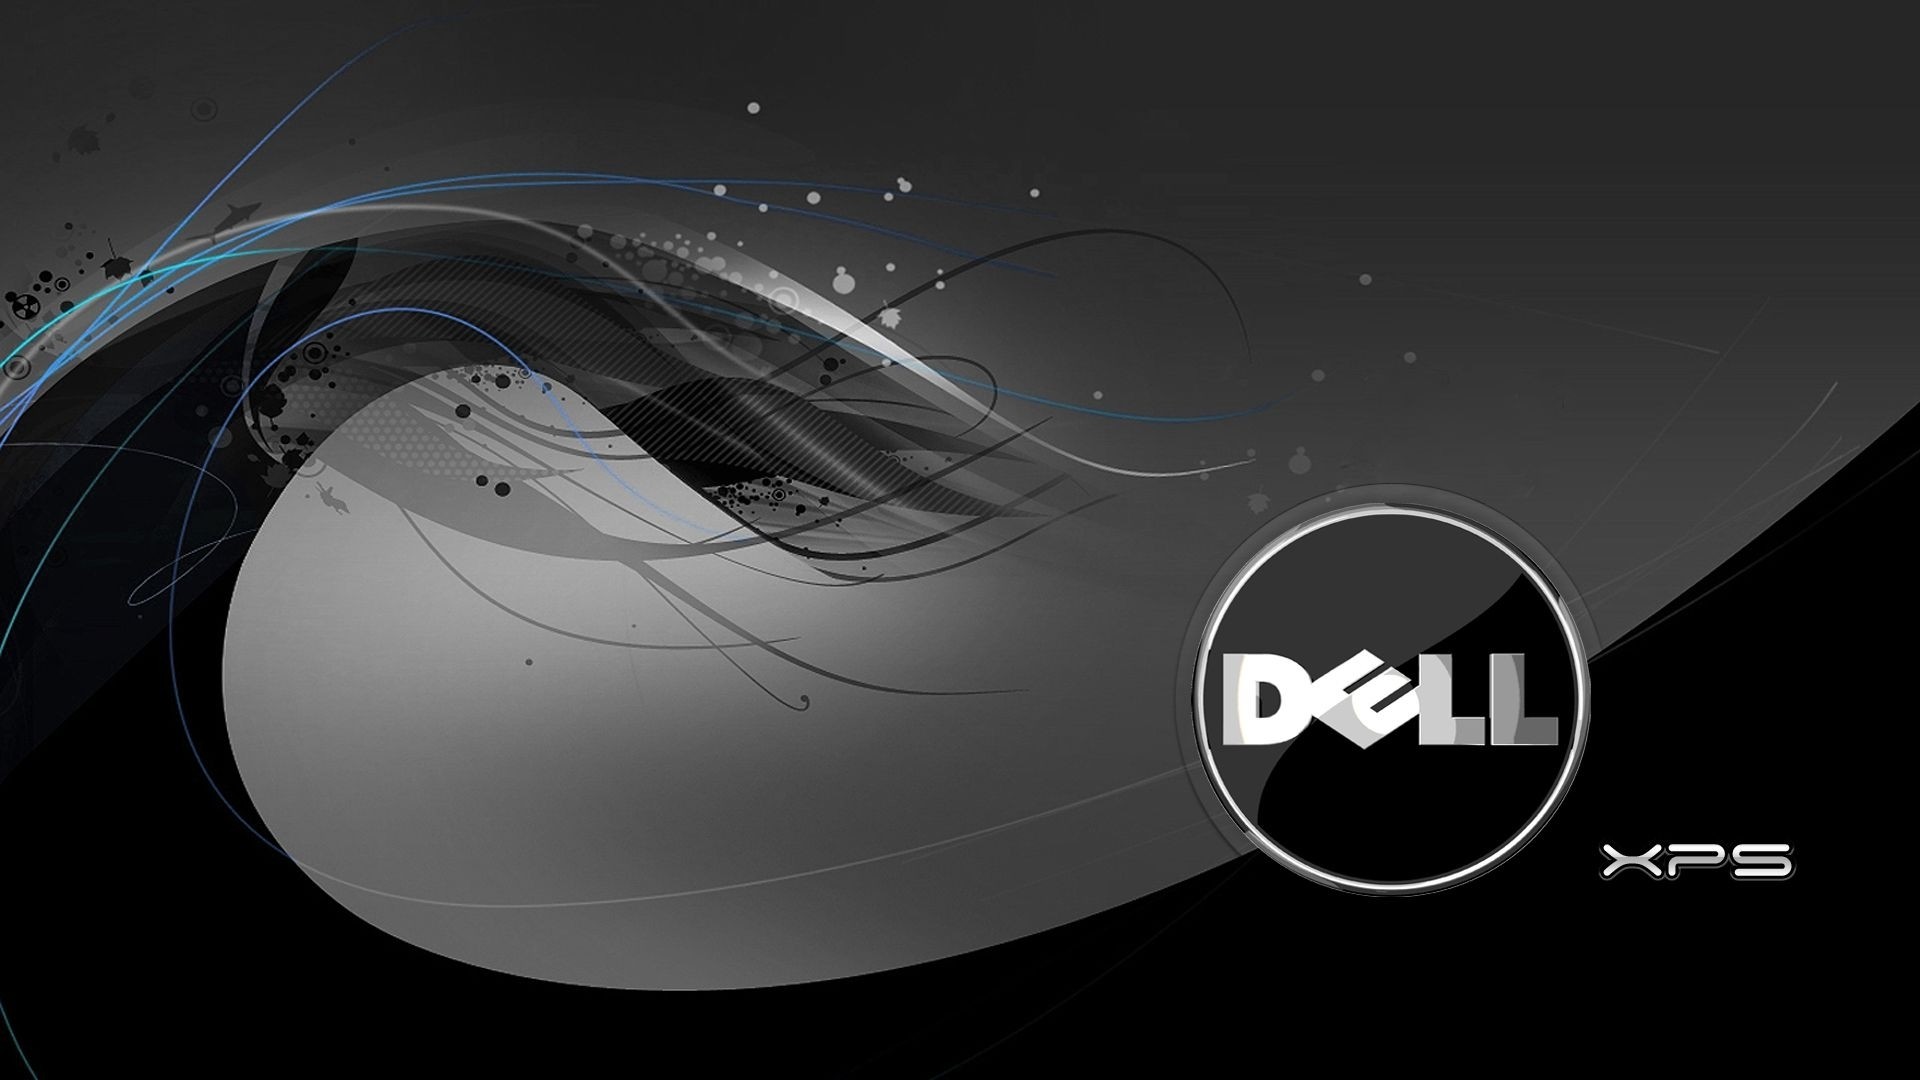 1920x1080 10 New And Newest Wallpaper For Dell Laptop for Desktop with FULL HD 1080p ( 1920 Ã 1080) FREE DOWNLOAD